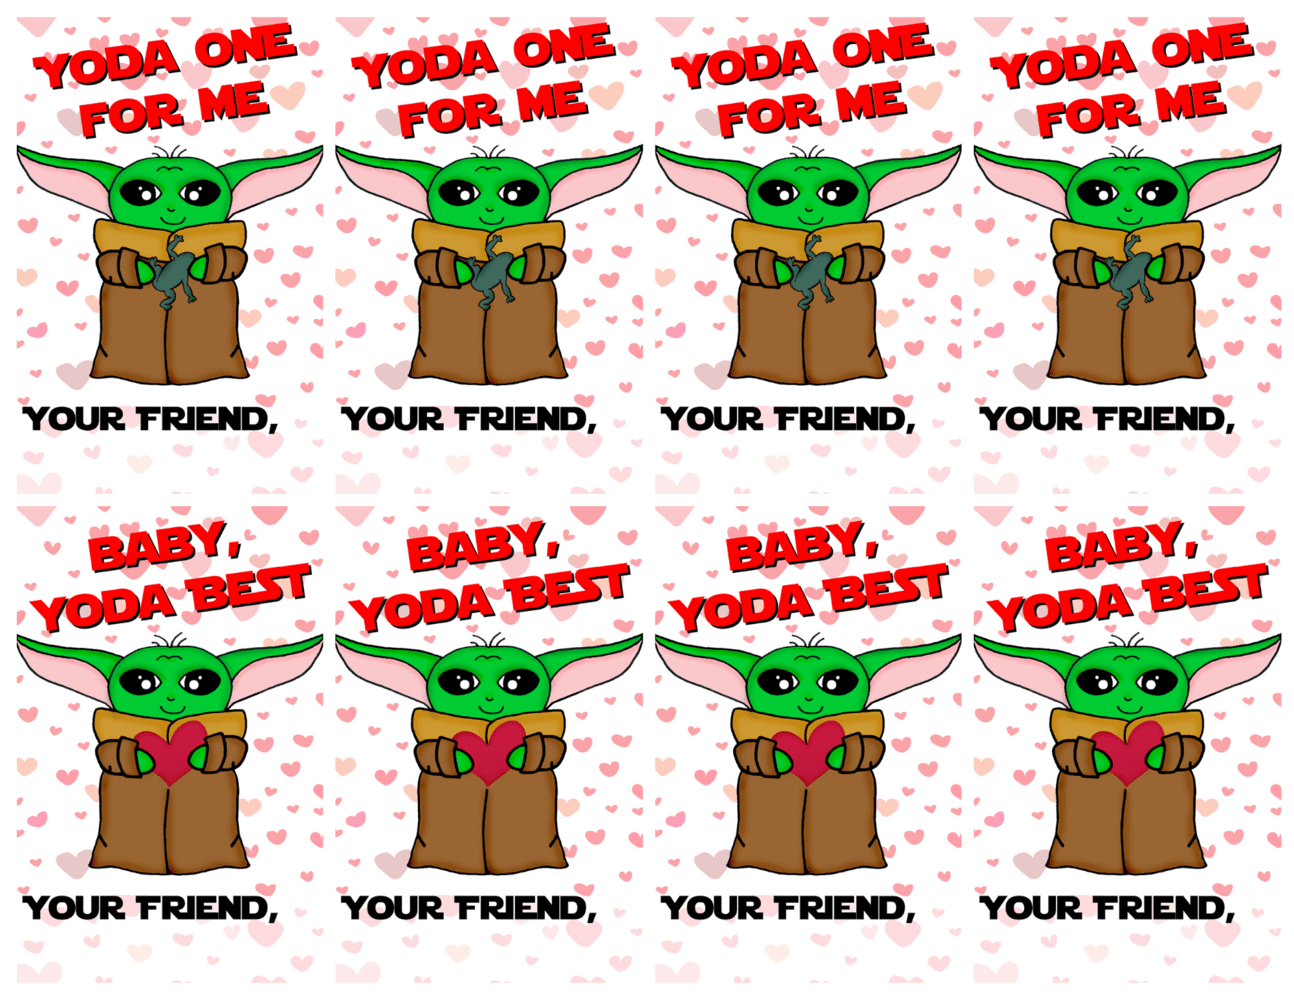 Baby Yoda valentines day card, 8 to a sheet, says Yoda One for me and Baby, Yoda Best.